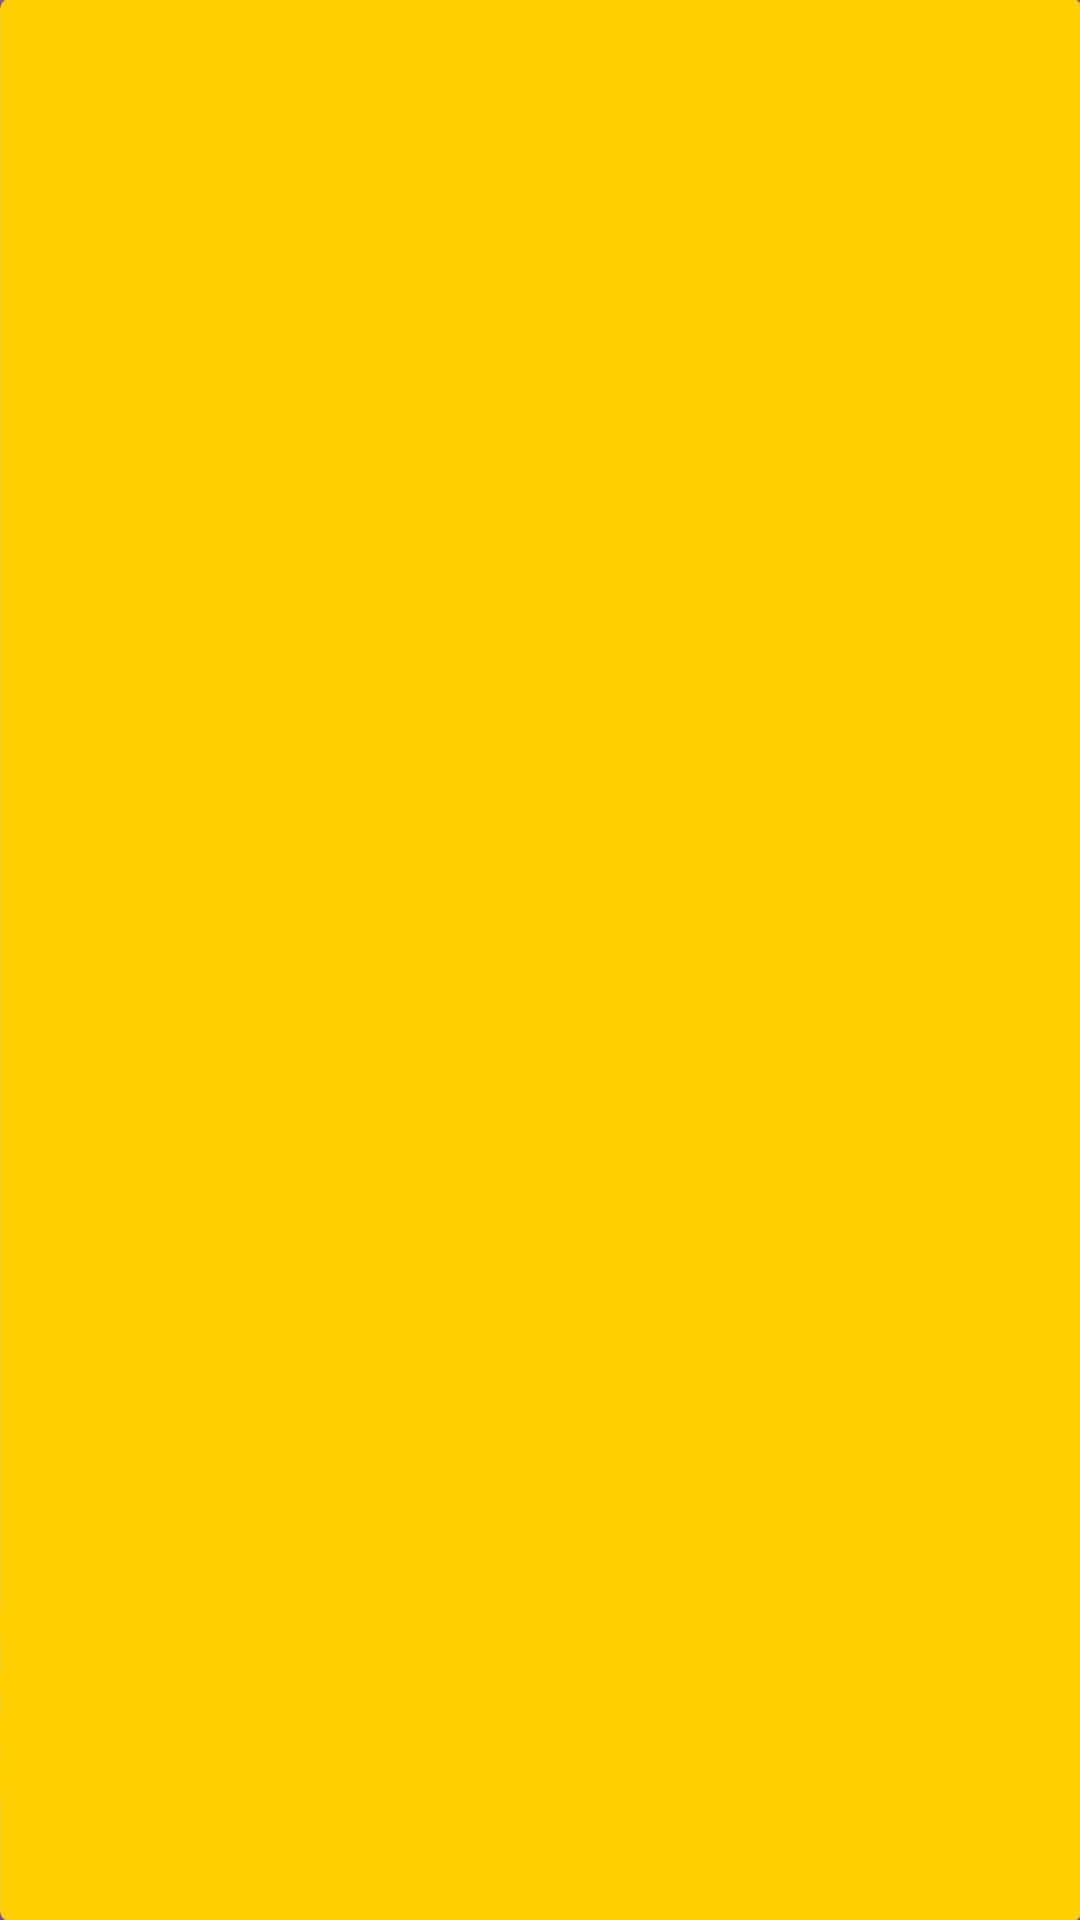 A Yellow Square With A White Background Wallpaper